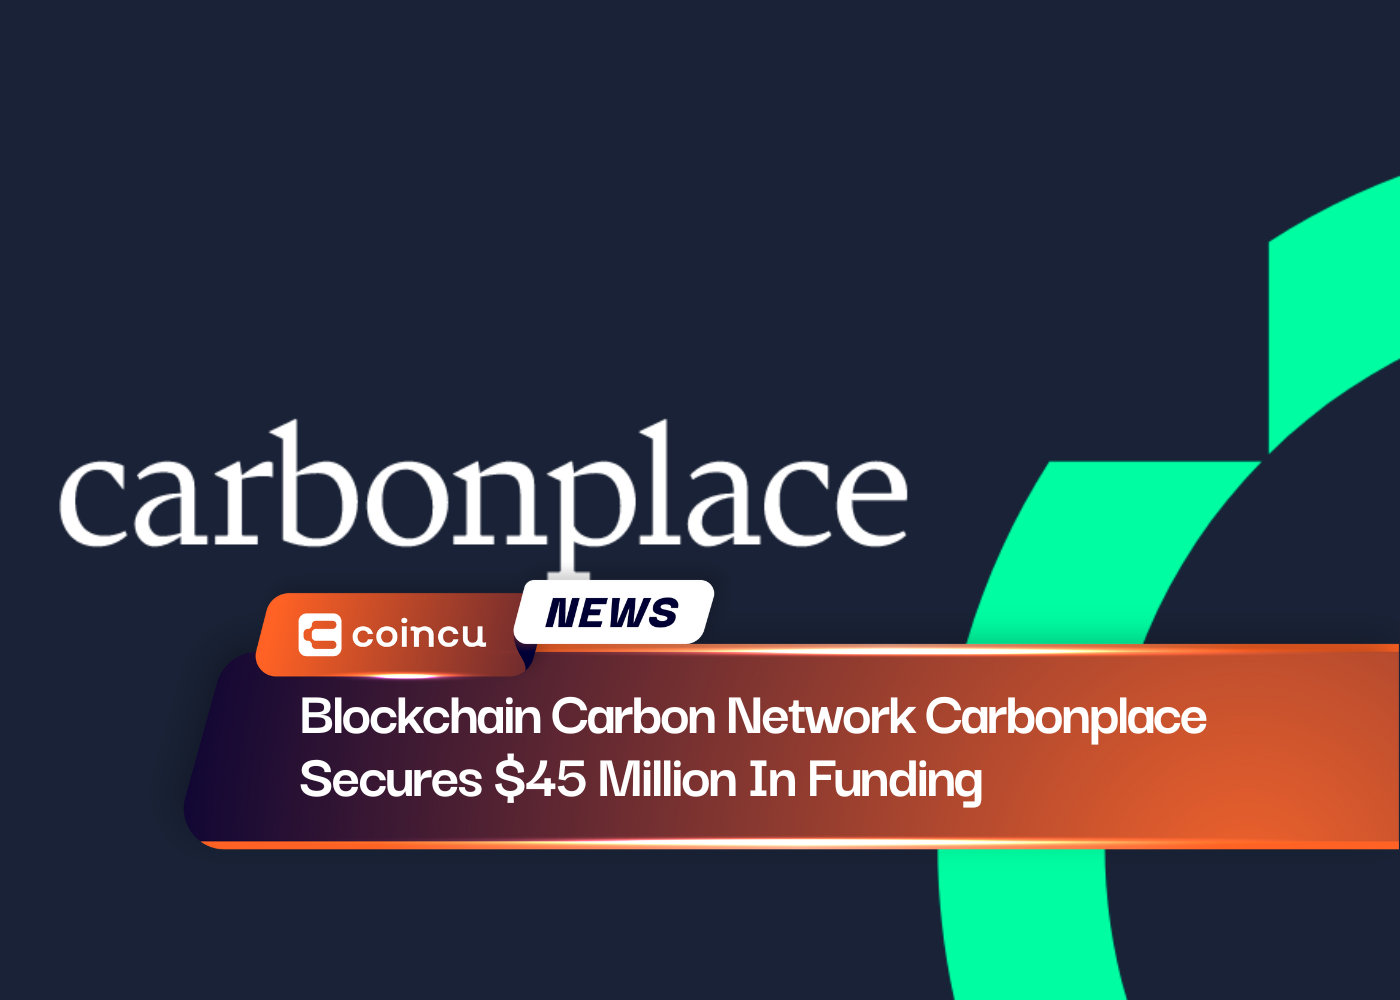 Blockchain Carbon Network Carbonplace Secures $45 Million In Funding